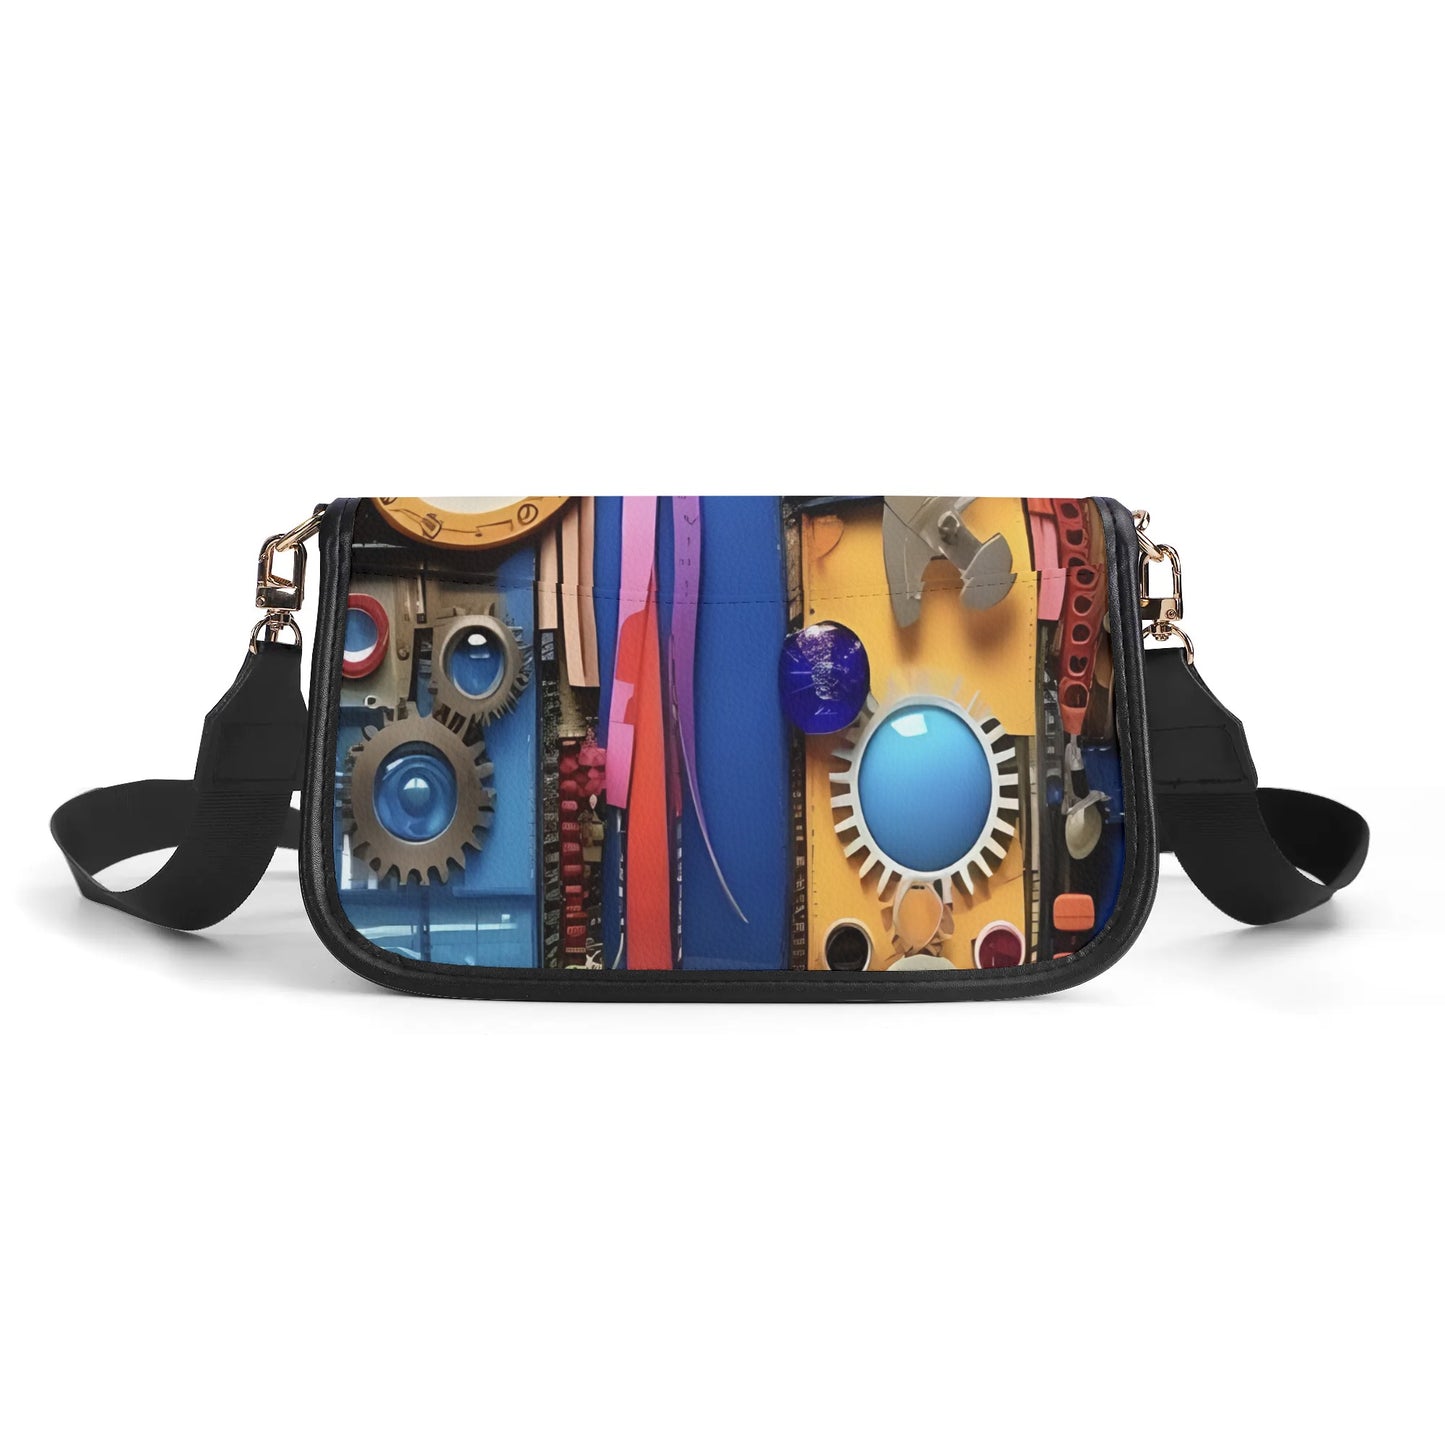 Womens Certified ShitHot Steampunk "The Cogs & Buttons" Shoulder Bag - #theshithotcompany